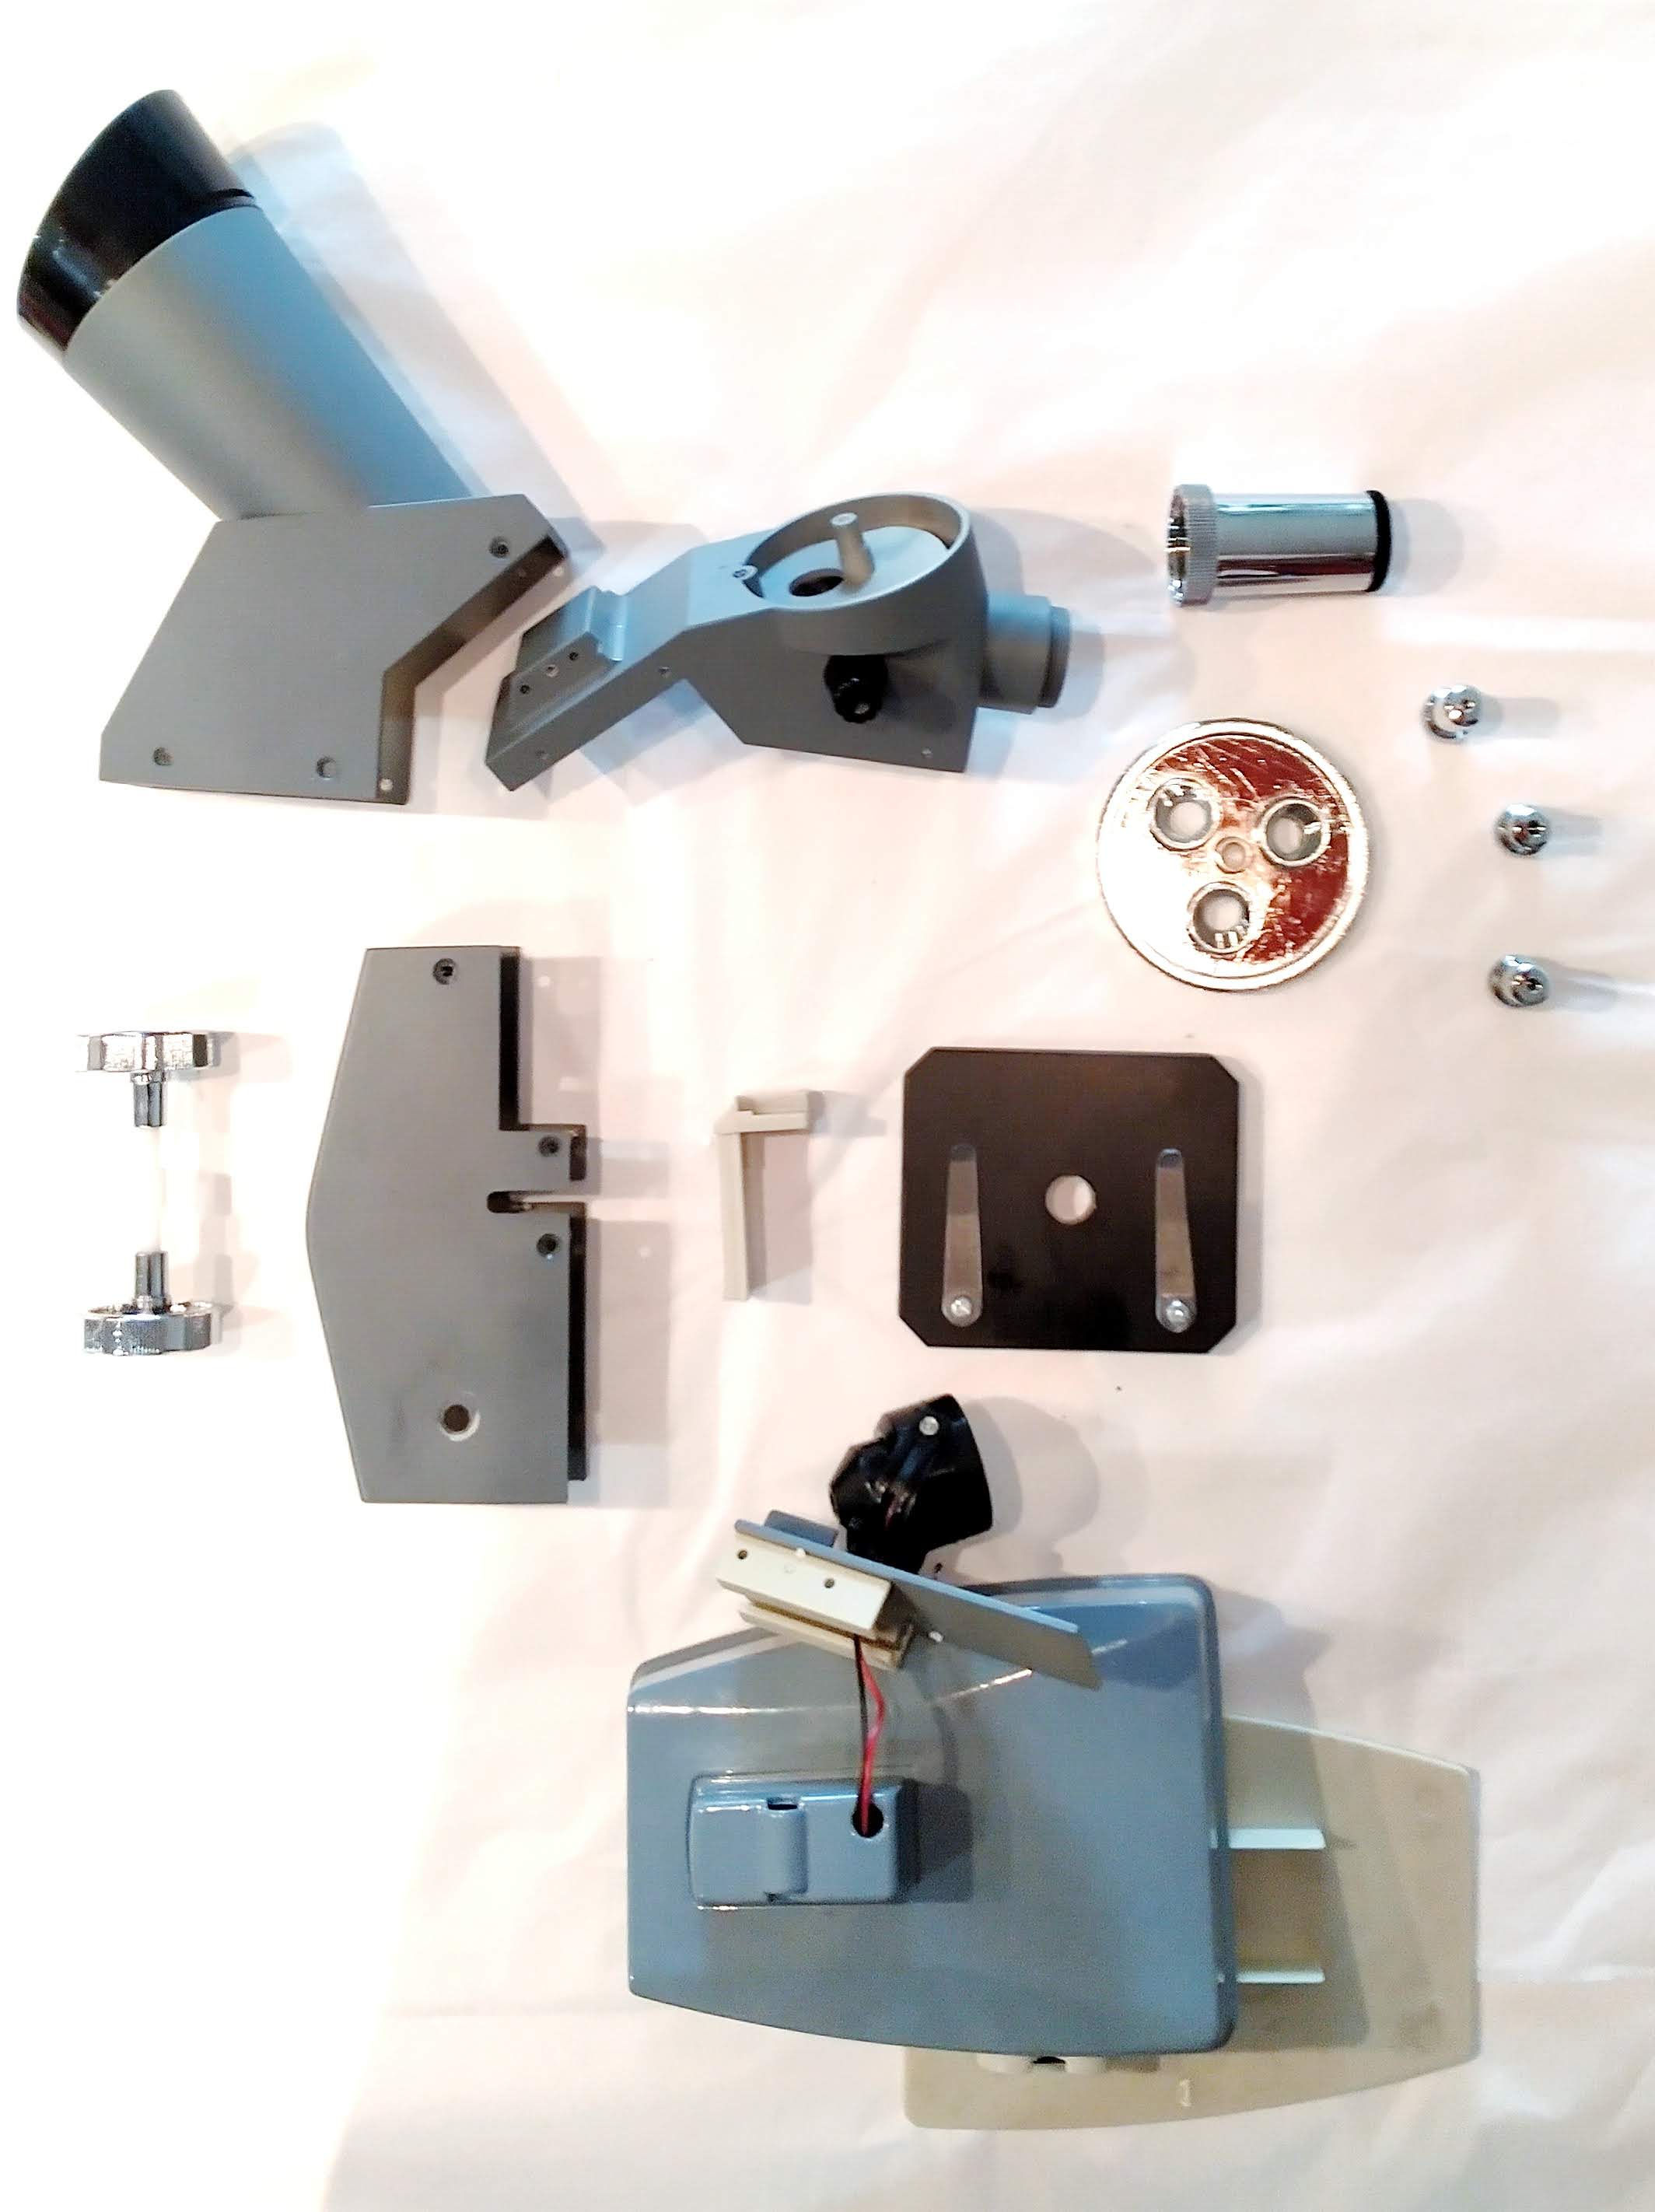 Tear down of the toy microscope